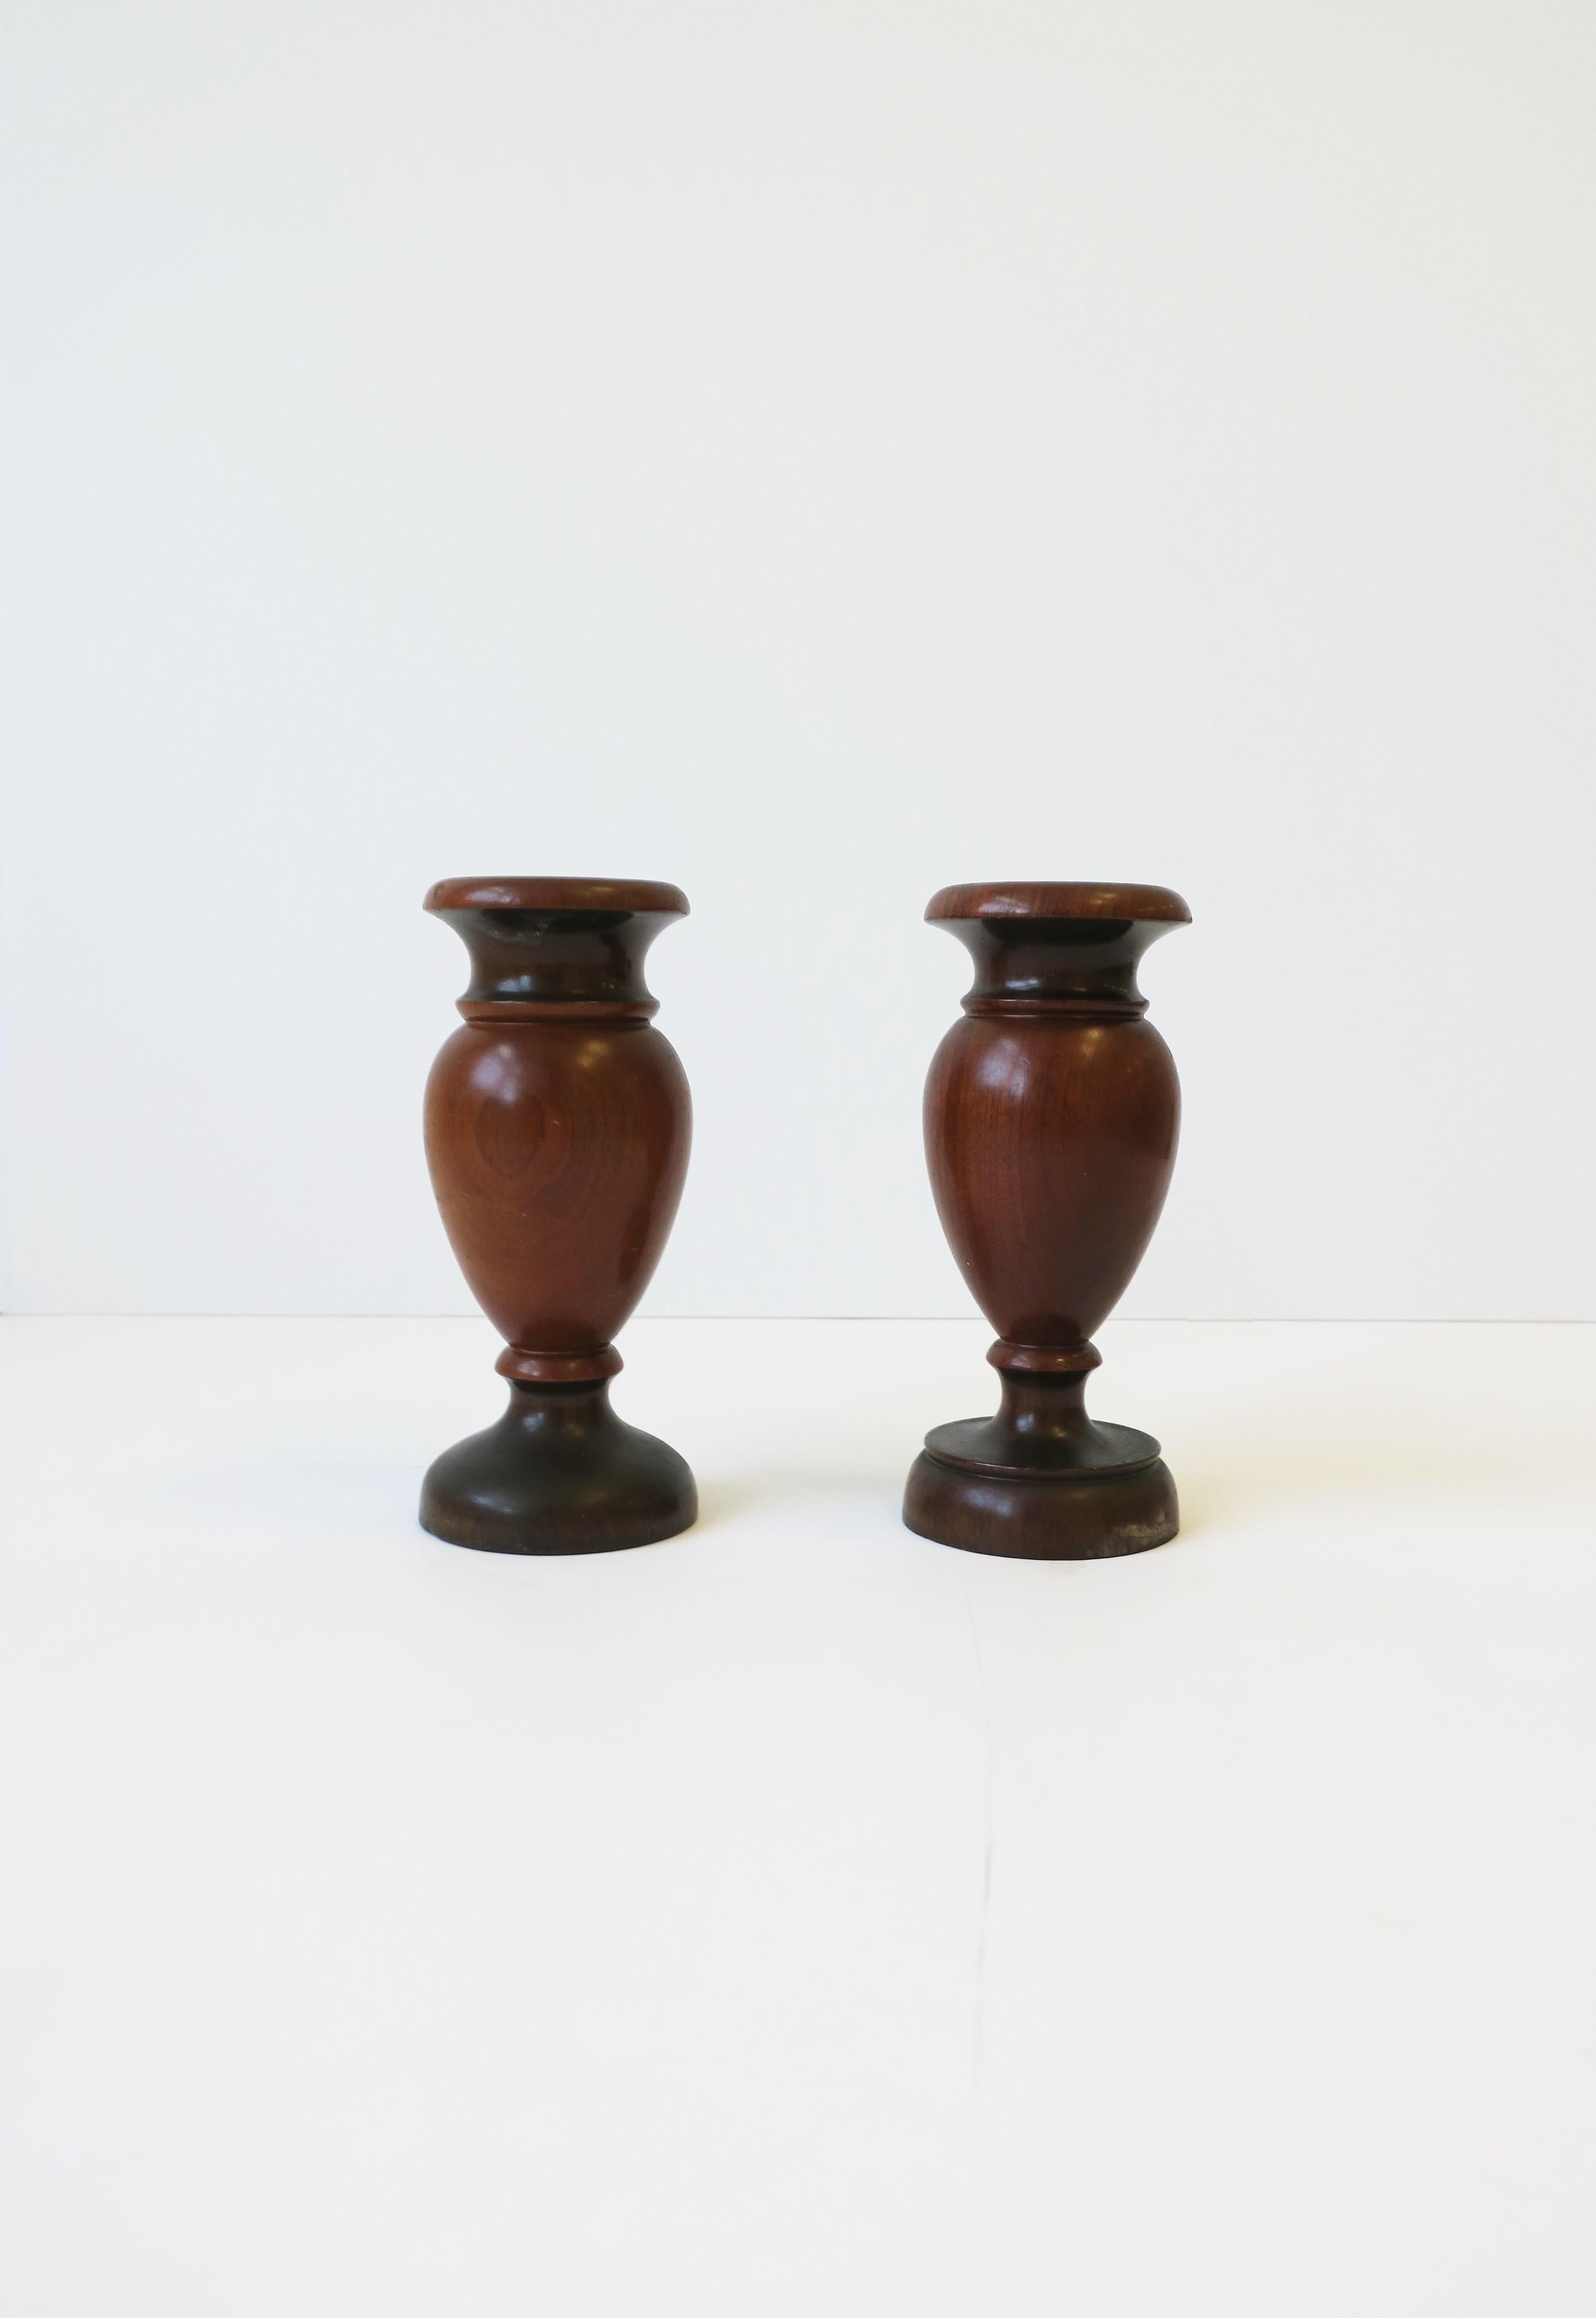 A beautiful pair/set of late-19th century English turned walnut urn spill vases with collard lip over neck, standing on a turned foot base, England. Dimensions: 2.63